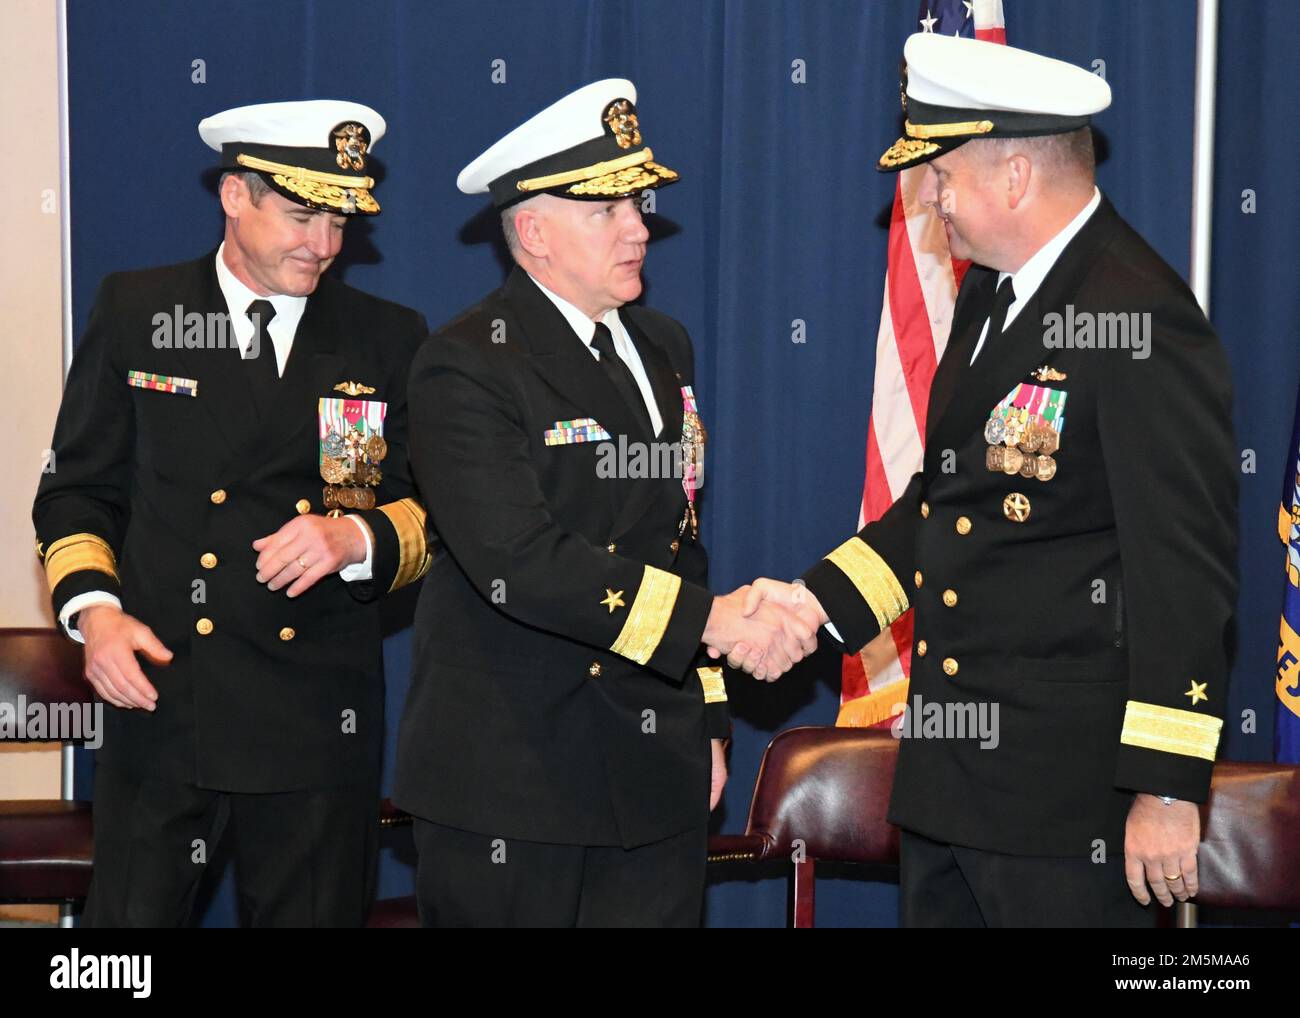 220325-N-GR655-0066 GROTON, Conn. (March 25, 2021) – Rear Adm. Rick Seif, outgoing commander of the Undersea Warfare Development Center (UWDC), shakes hands with his relief, Rear Adm. Martin Muckian, during a change-of-command ceremony at the Submarine Force Museum in Groton, Connecticut, March 25, 2022. UWDC, established on Sept. 1, 2015, leads the Navy’s undersea superiority; develops doctrine, concepts of operations, tactics, techniques, and procedures for undersea warfare; assesses undersea warfare performance and warfighting readiness of the fleet; provides training for undersea platforms Stock Photo